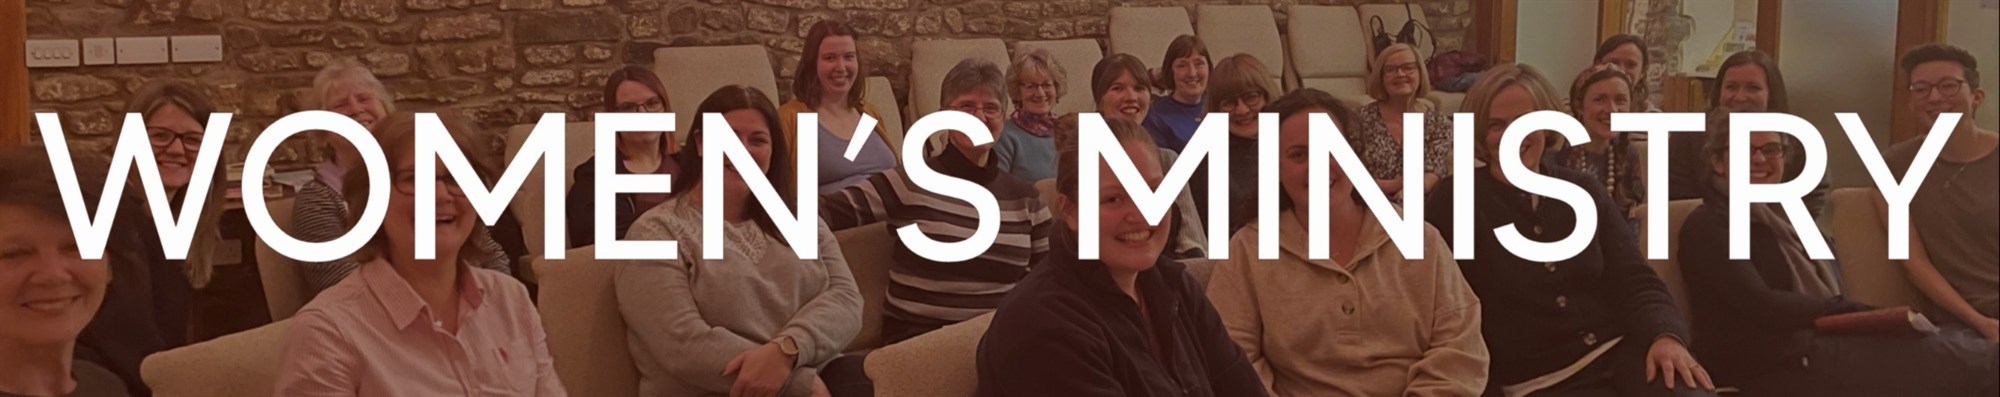 Women's Ministry Page Banner